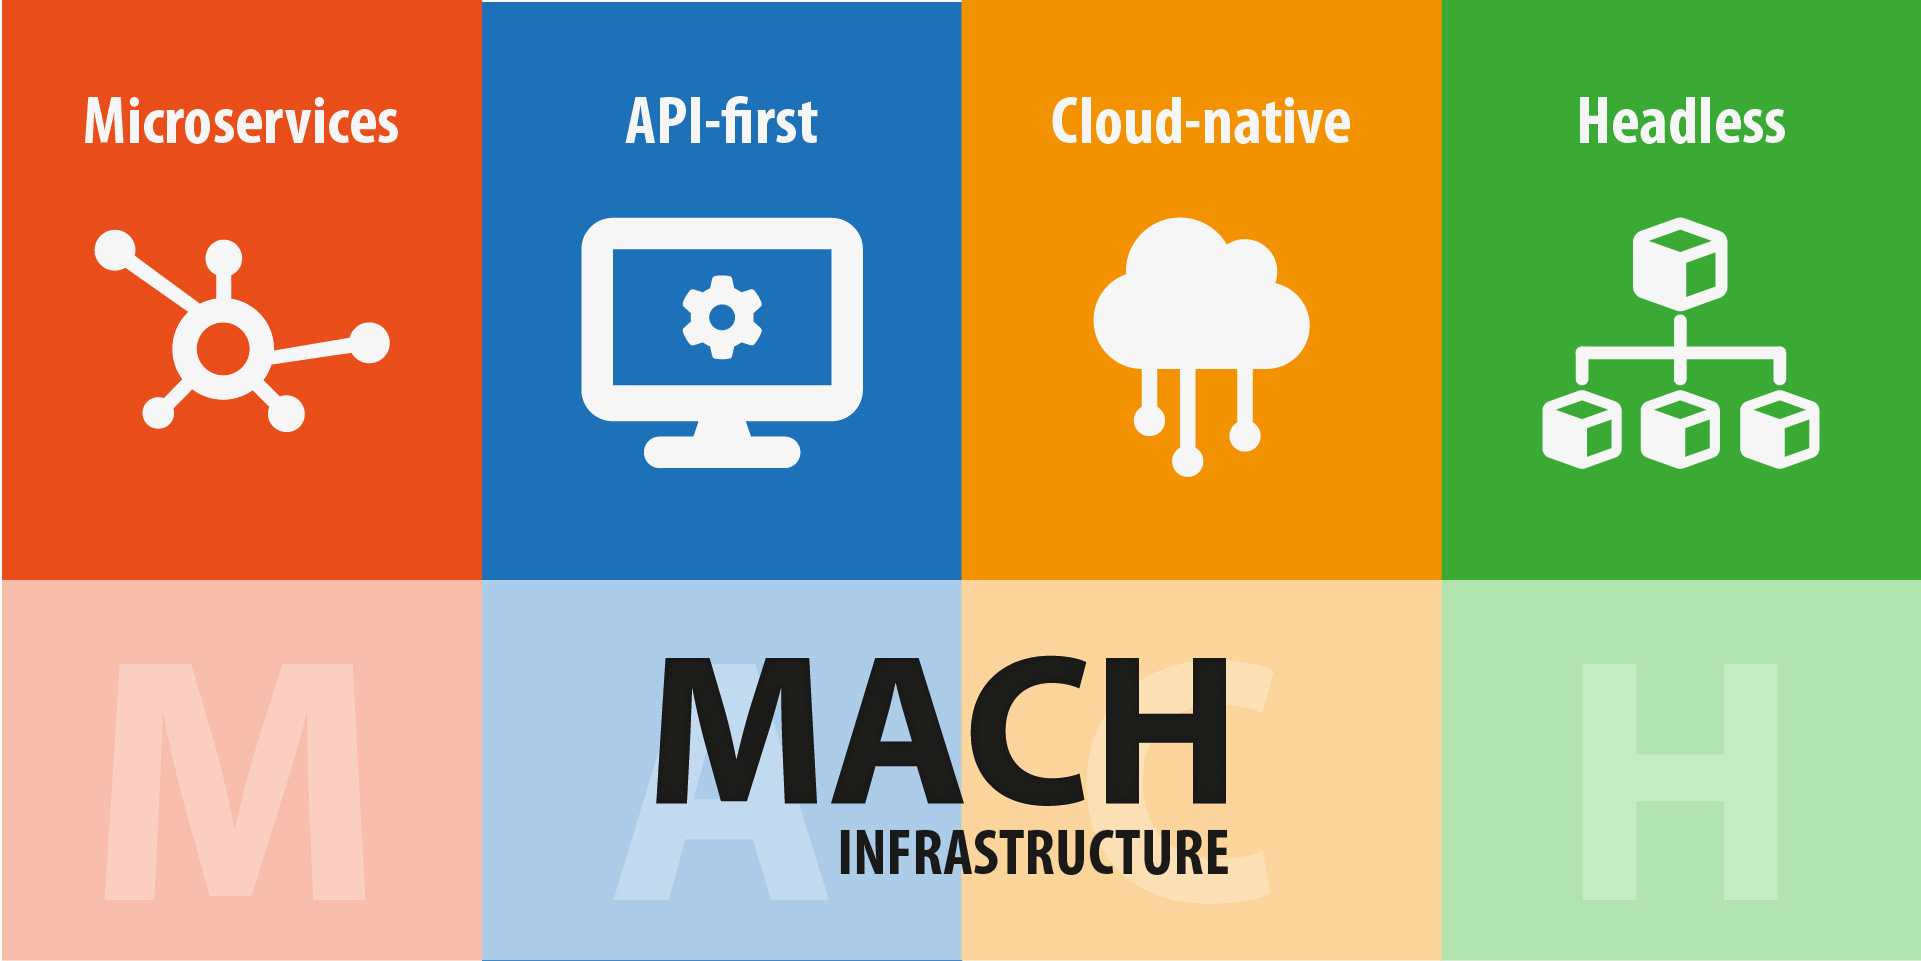 MACH is also an acronym that brings together a series of technological principles that underpin the most advanced software platforms.